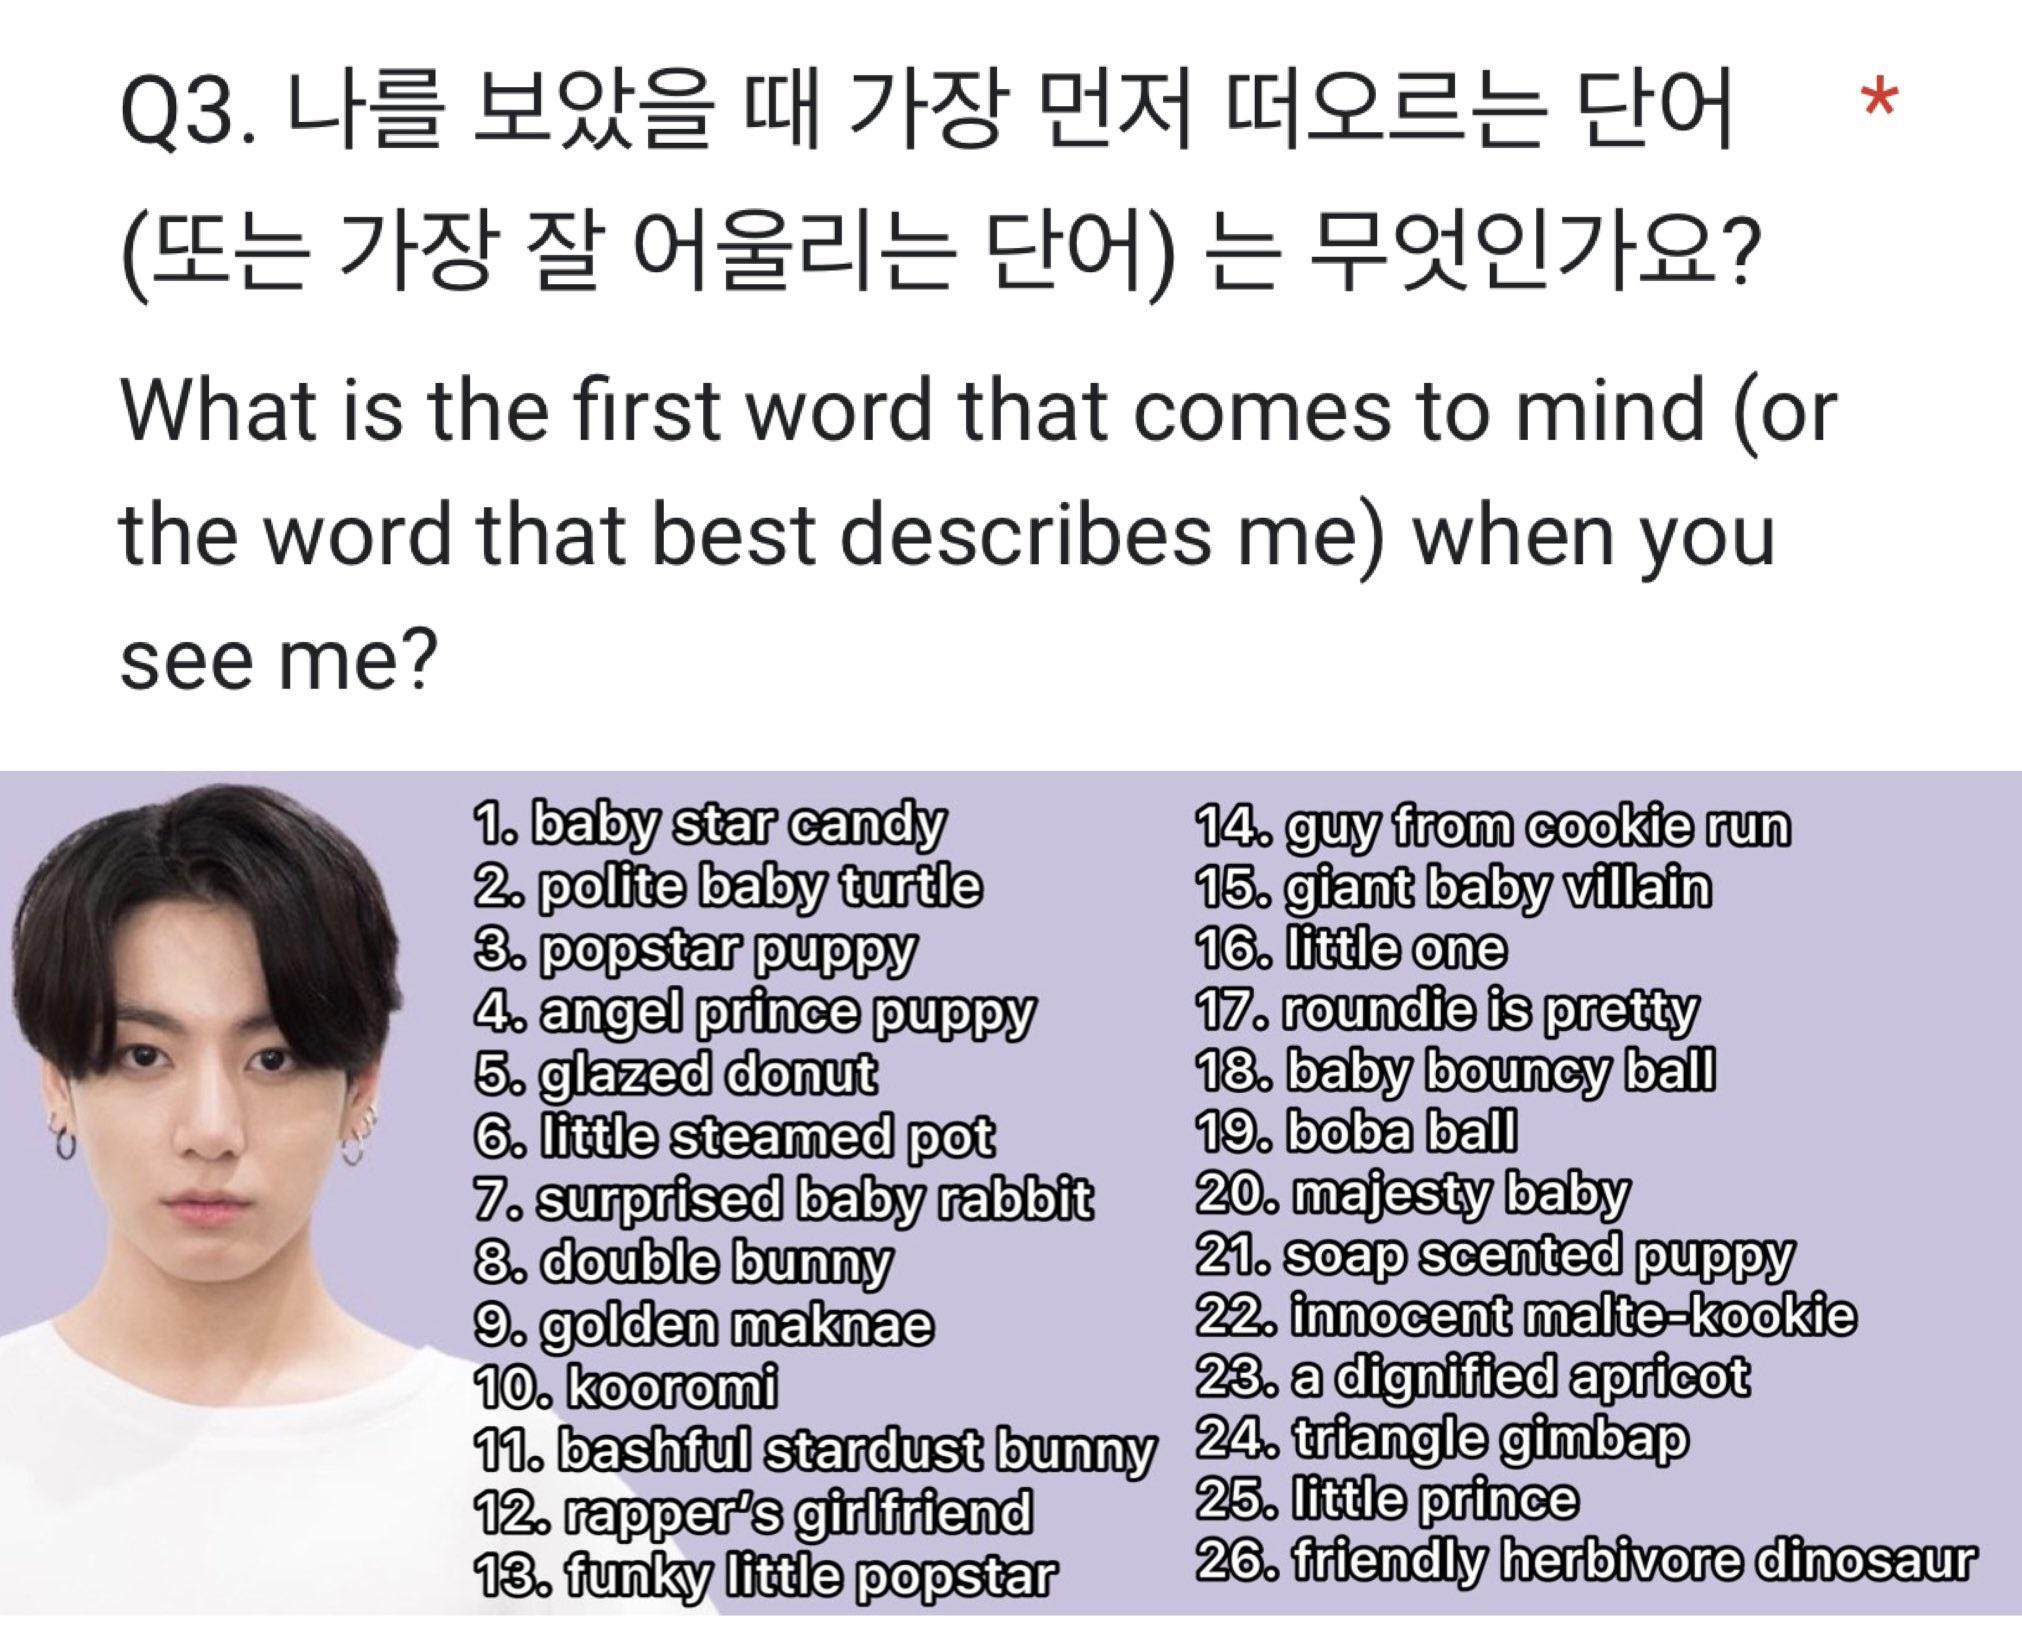 Which would you choose to describe Jungkook?